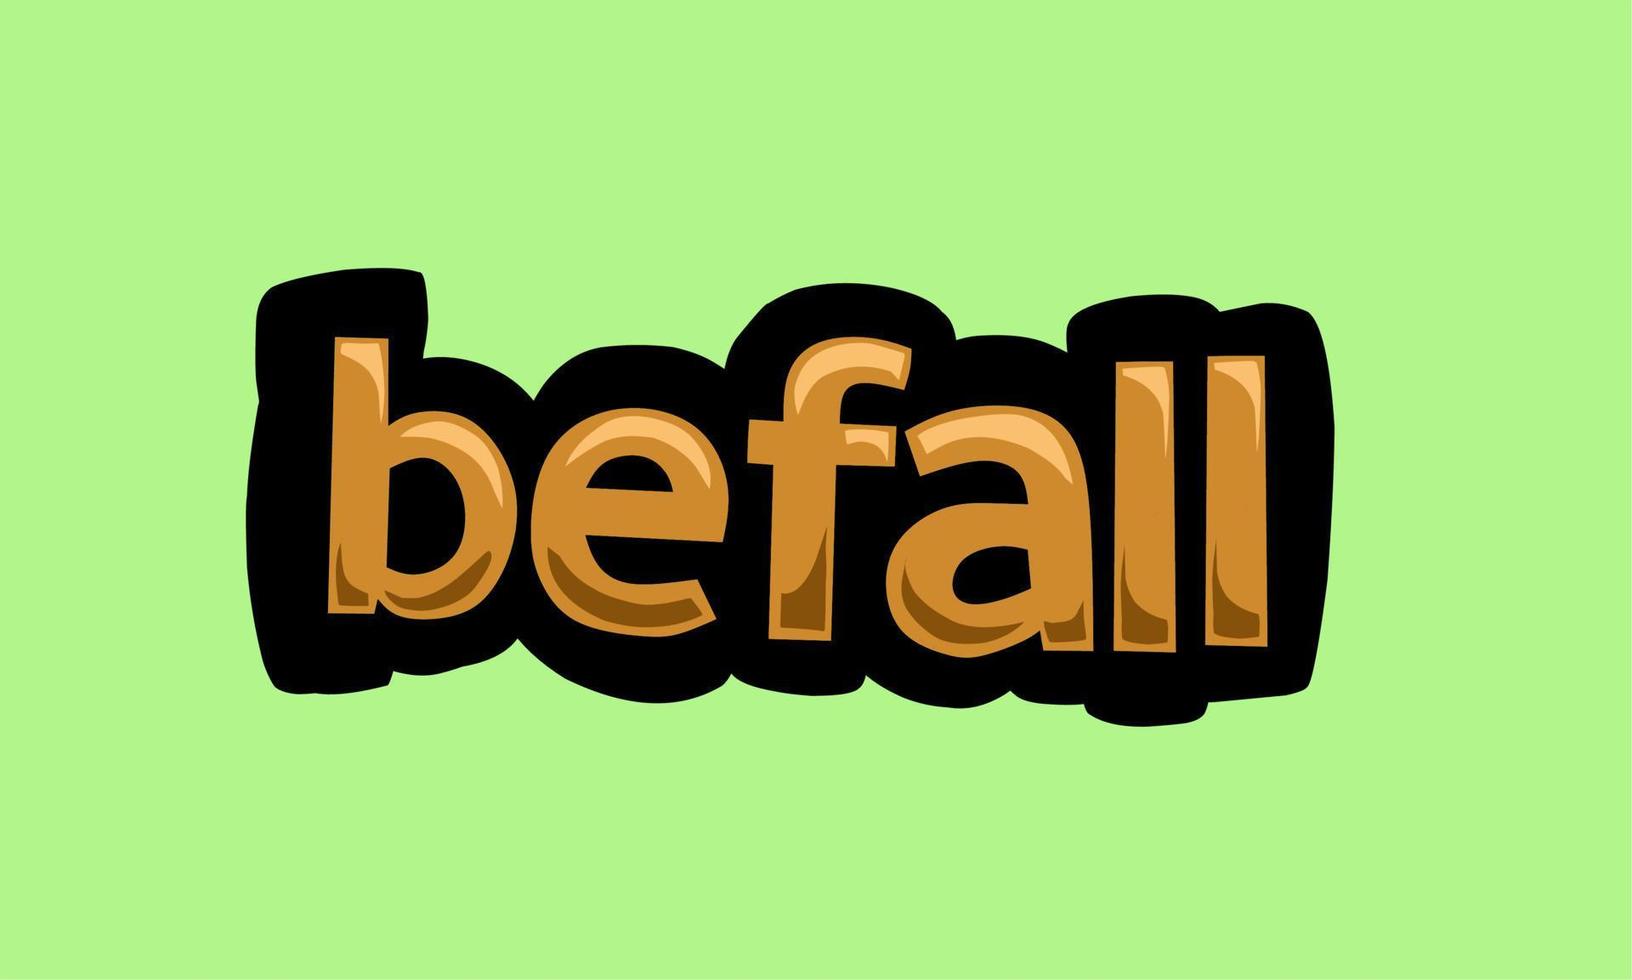 befall writing vector design on a green background